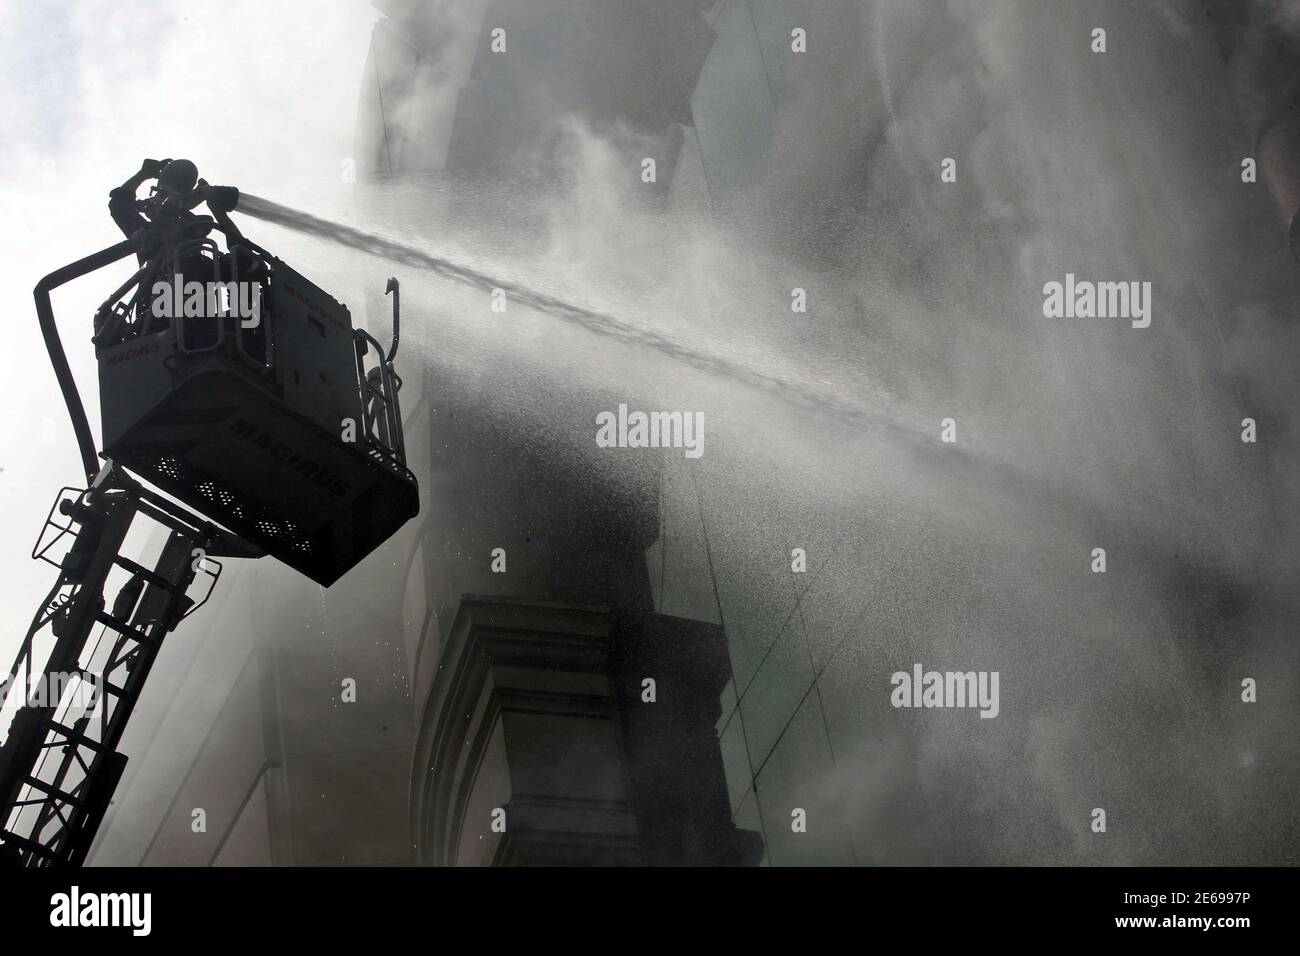 túnel Camello Sinceramente A fire-fighter works to extinguish a fire at Talaat Harb Mall in the  country's central business district in downtown Cairo March 17, 2013. The  state news agency MENA quoted witnesses as saying